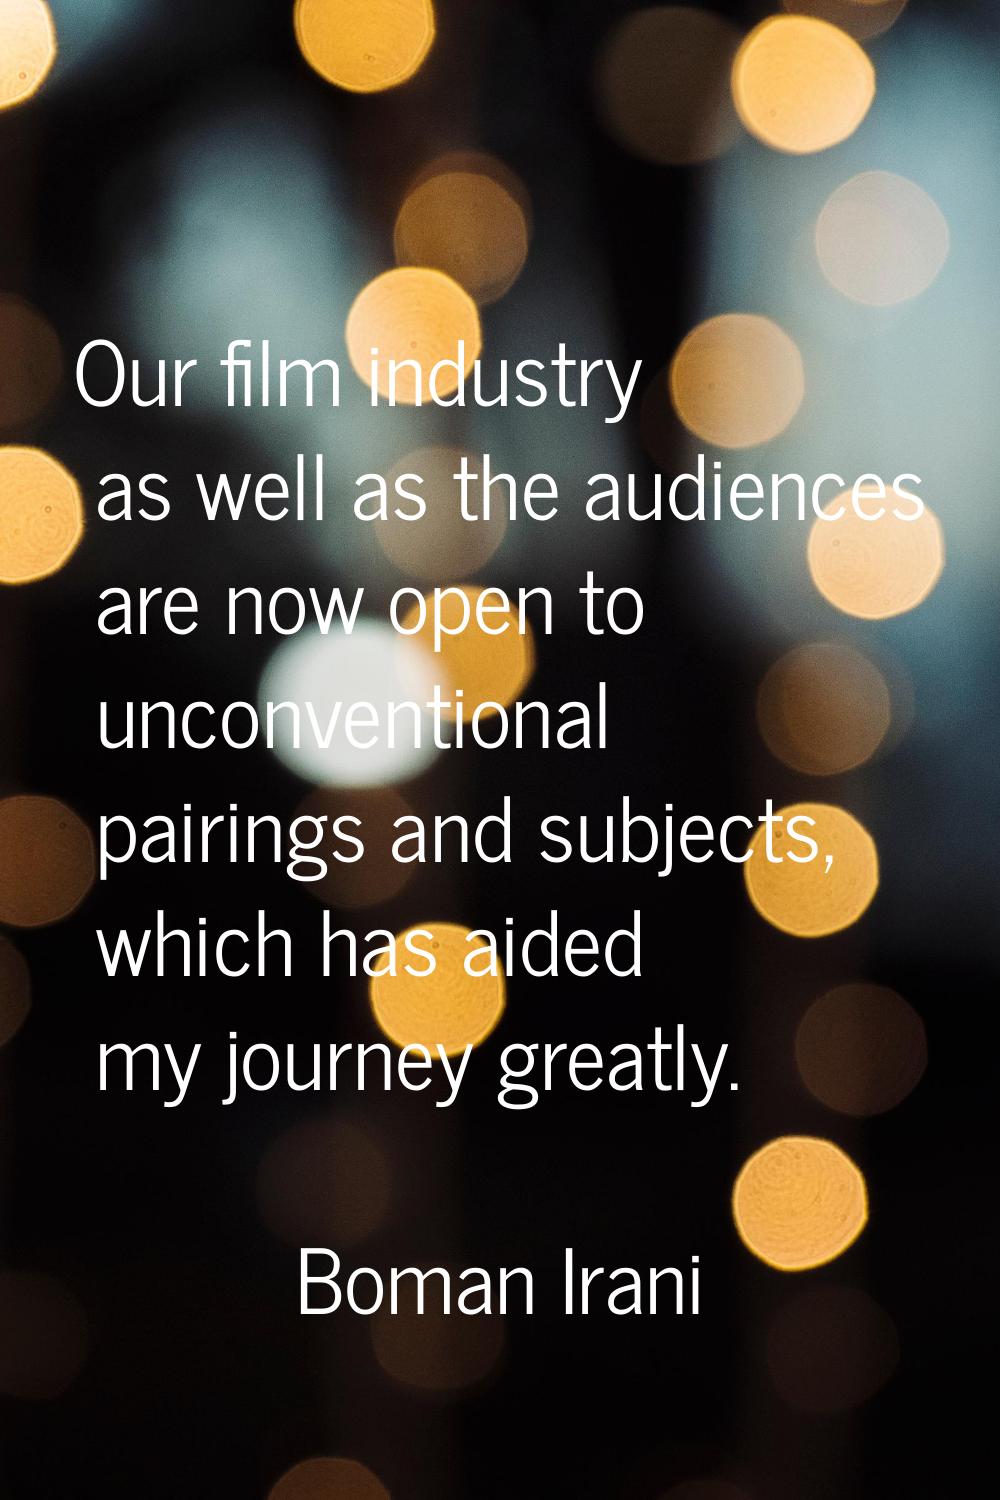 Our film industry as well as the audiences are now open to unconventional pairings and subjects, wh